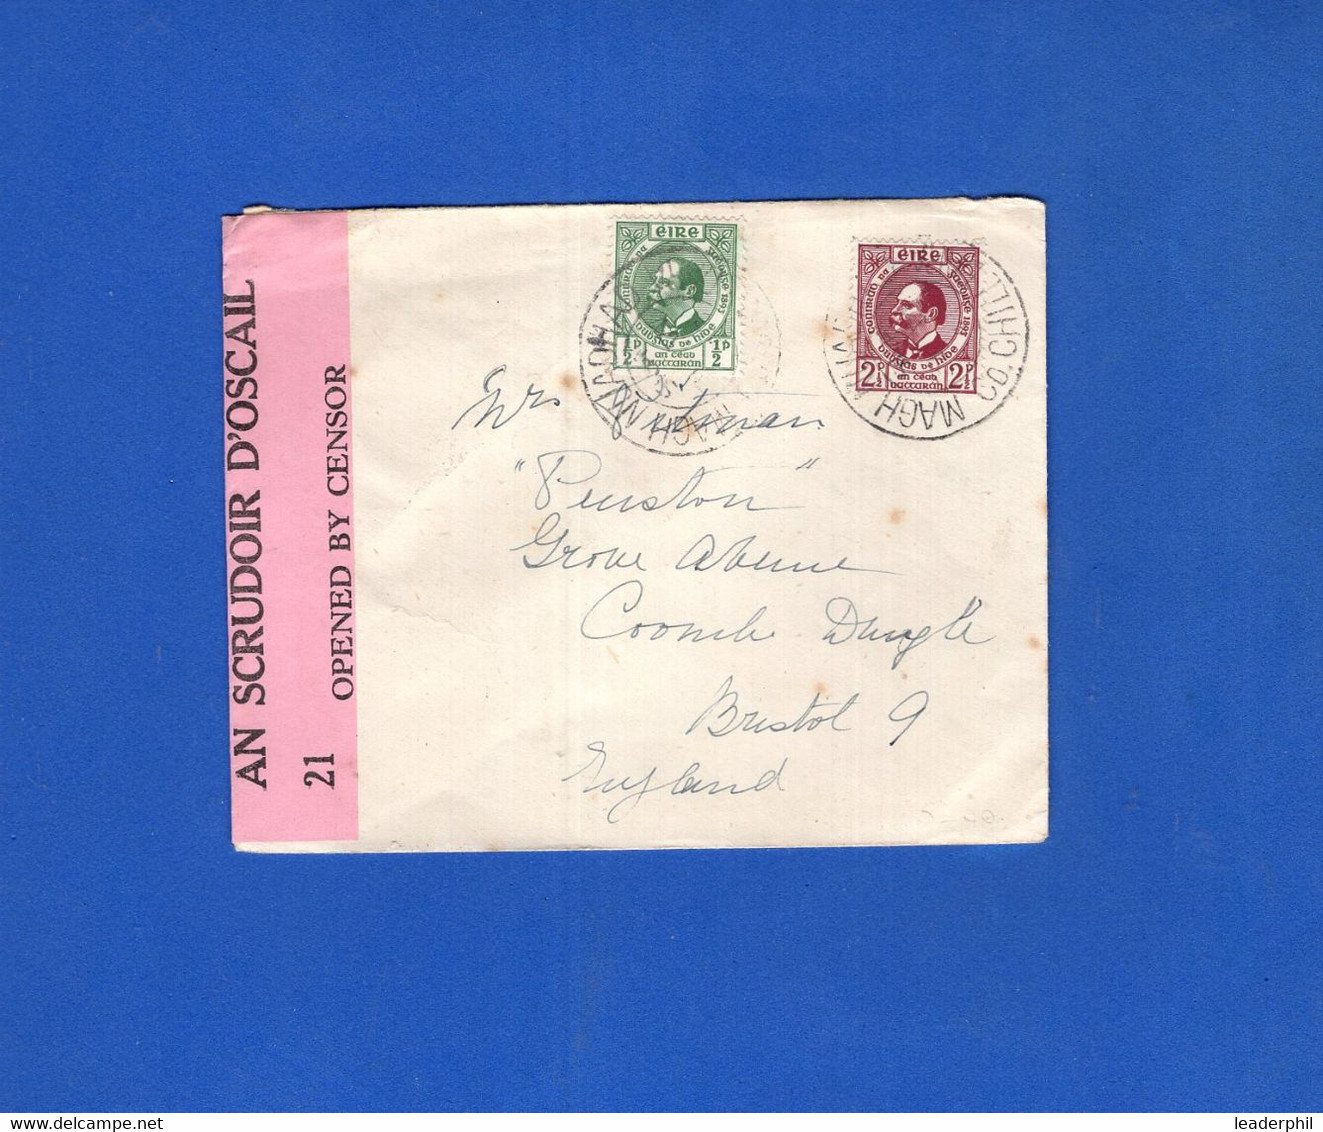 IRELAND, 1940, CENSORED COVER TO BRISTOL (UK) VF - Covers & Documents